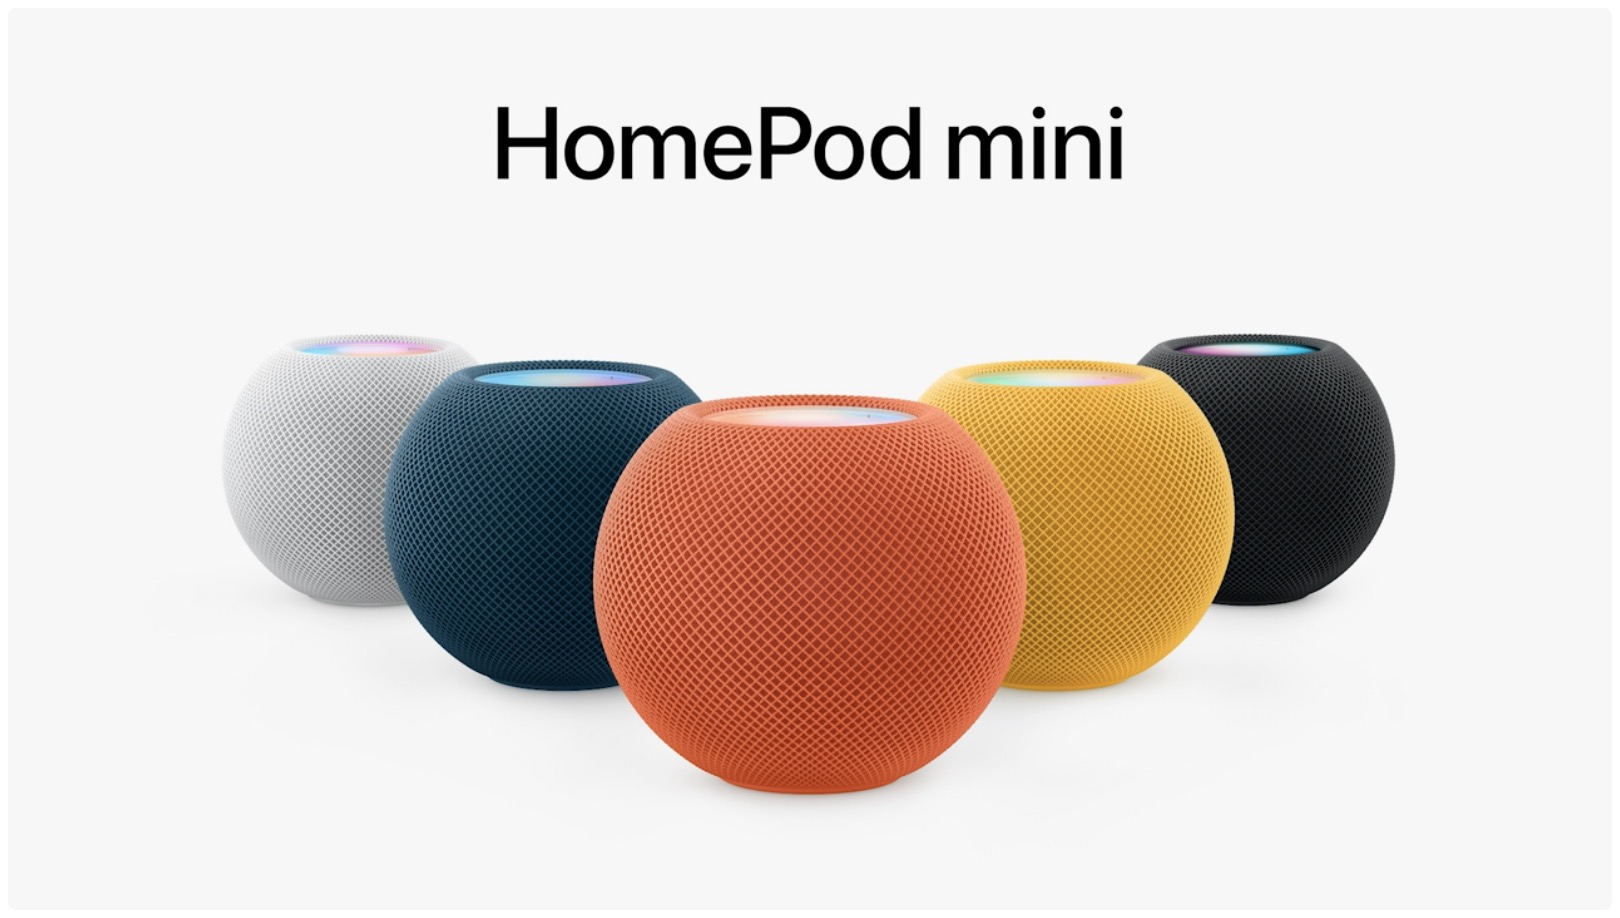 Apple's marketing image showing HomePod mini in white, blue, orange, yellow and black